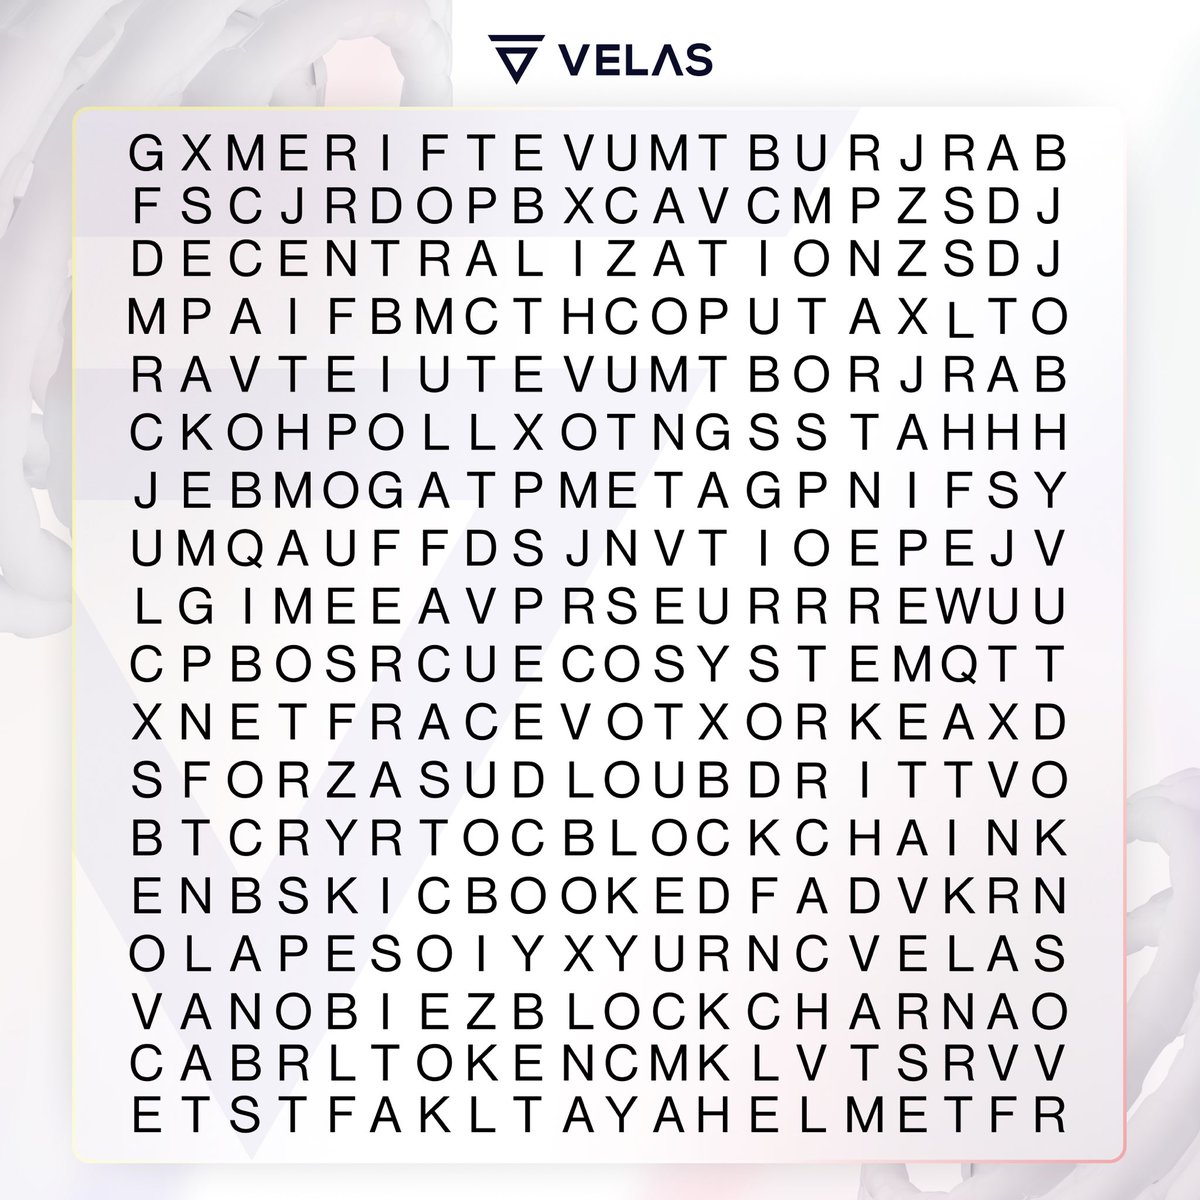 Try to find all the hidden words 😁